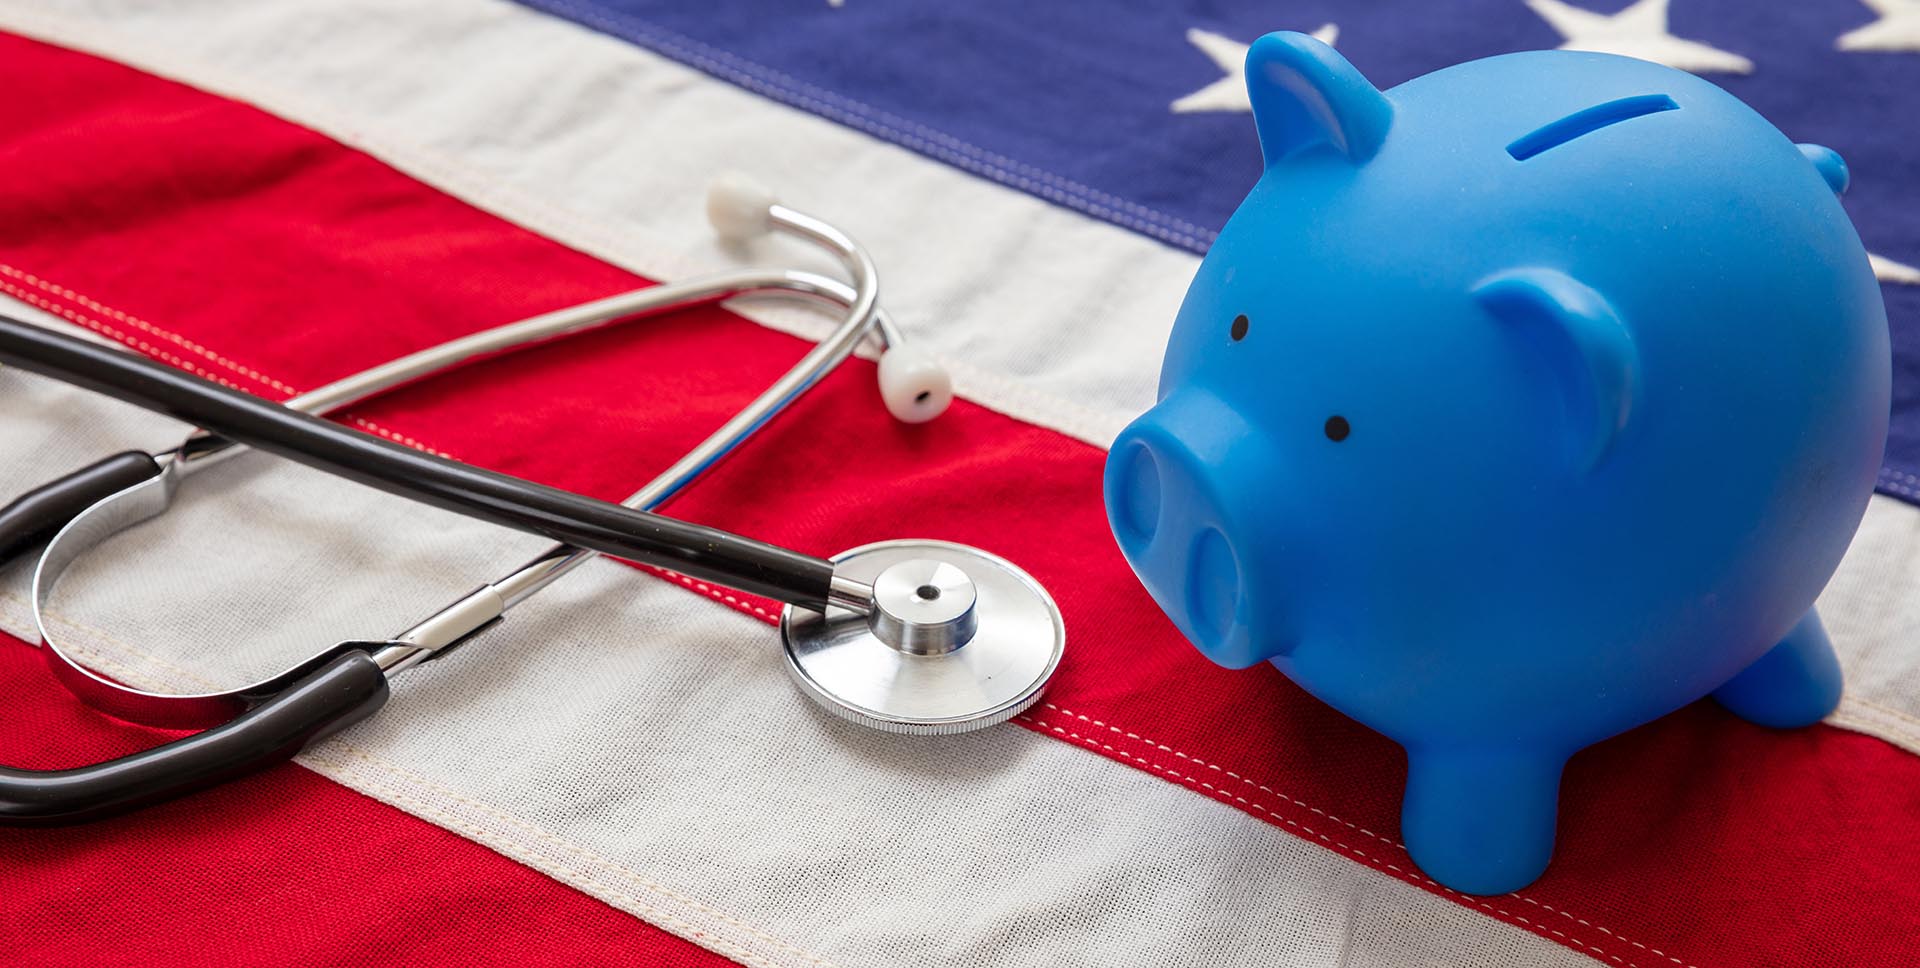 Getting To Know The Medicaid Program